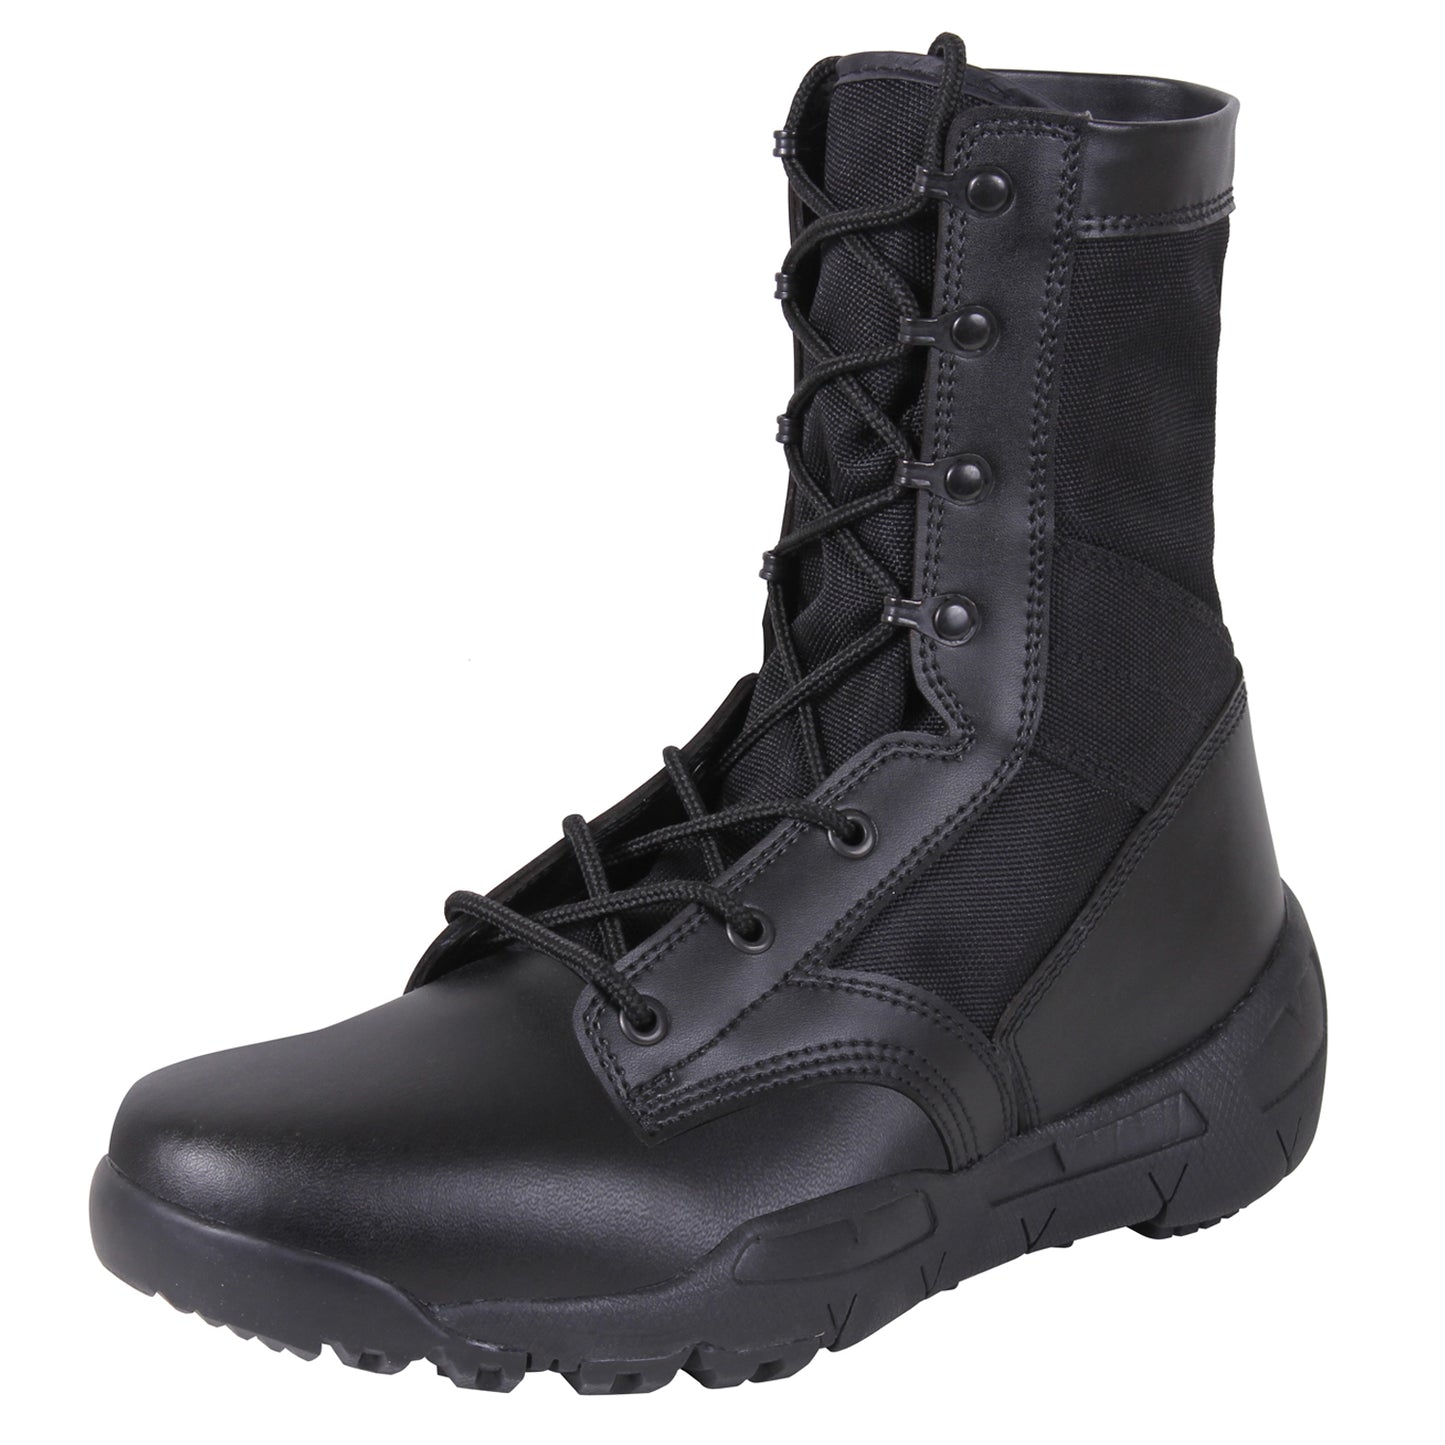   Rothco’s V-Max Lightweight Tactical Boot is the optimal choice for an all-purpose military-style boot.      Military-Style 8 ½” Cross Training Boot Is Designed With The Comfort And Support Of A Running Shoe     The V-Max Lightweight Boot Interior Contains A Removable EVA Insole And 2 Screen Air Vents To Keep Your Feet Cool     Rubber And EVA Outsole Provides Improved Traction While You Are On The Move     Iron Eyelet Lace System Will Keep Your Tactical Boots Tightly Secured